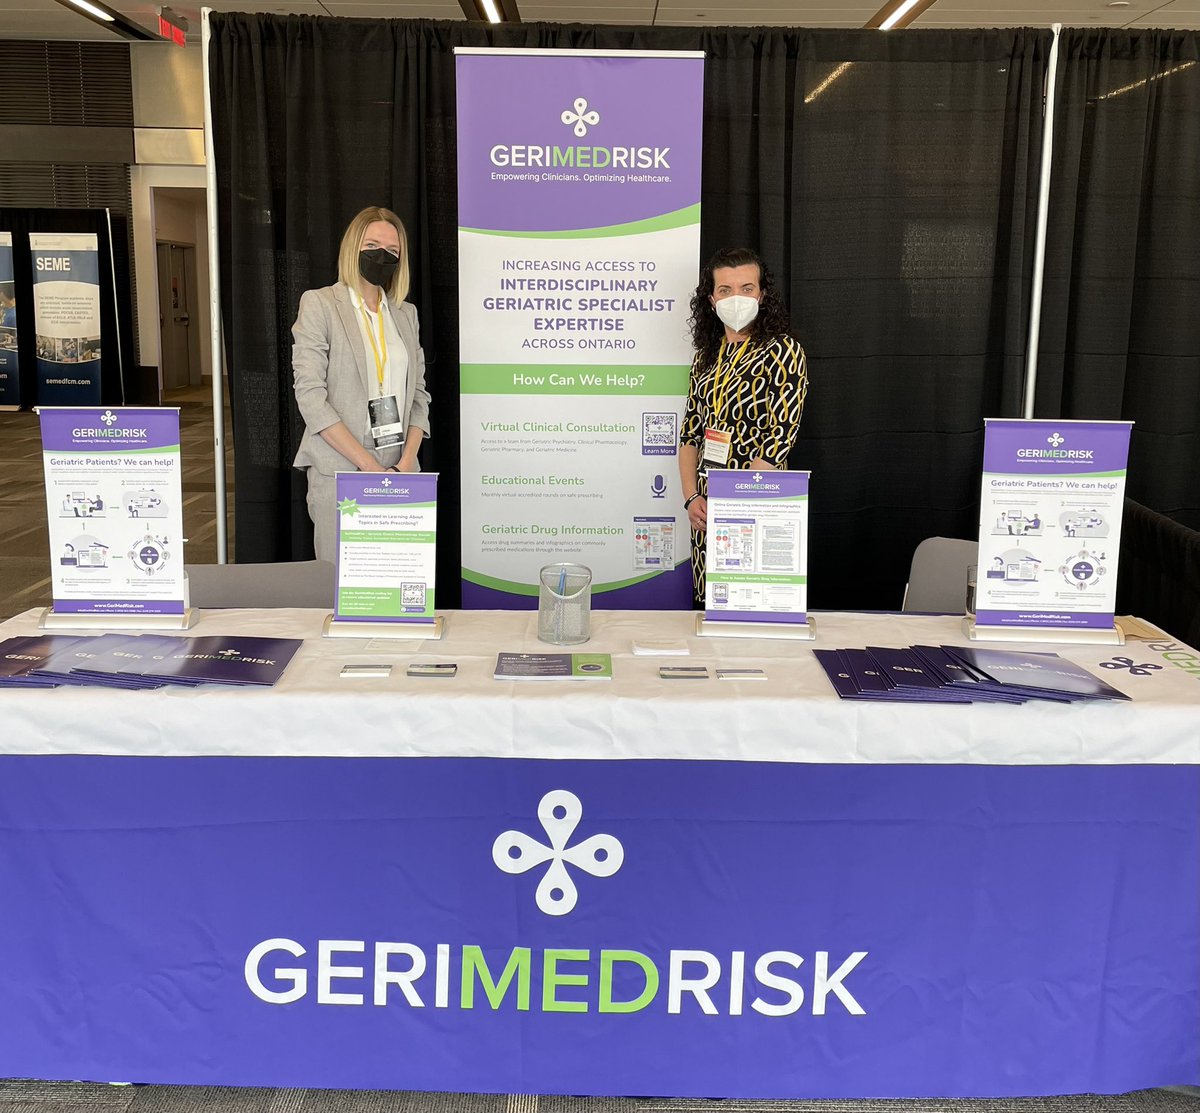 We are at the @SRPCanada conference and looking forward to connecting with #rural physicians! Visit #GeriMedRisk pharmacist @PamHowell1975 and @lindsay_a_cox in the foyer to learn more about #GeriMedRisk #geriatrics #medications #clinicalservice